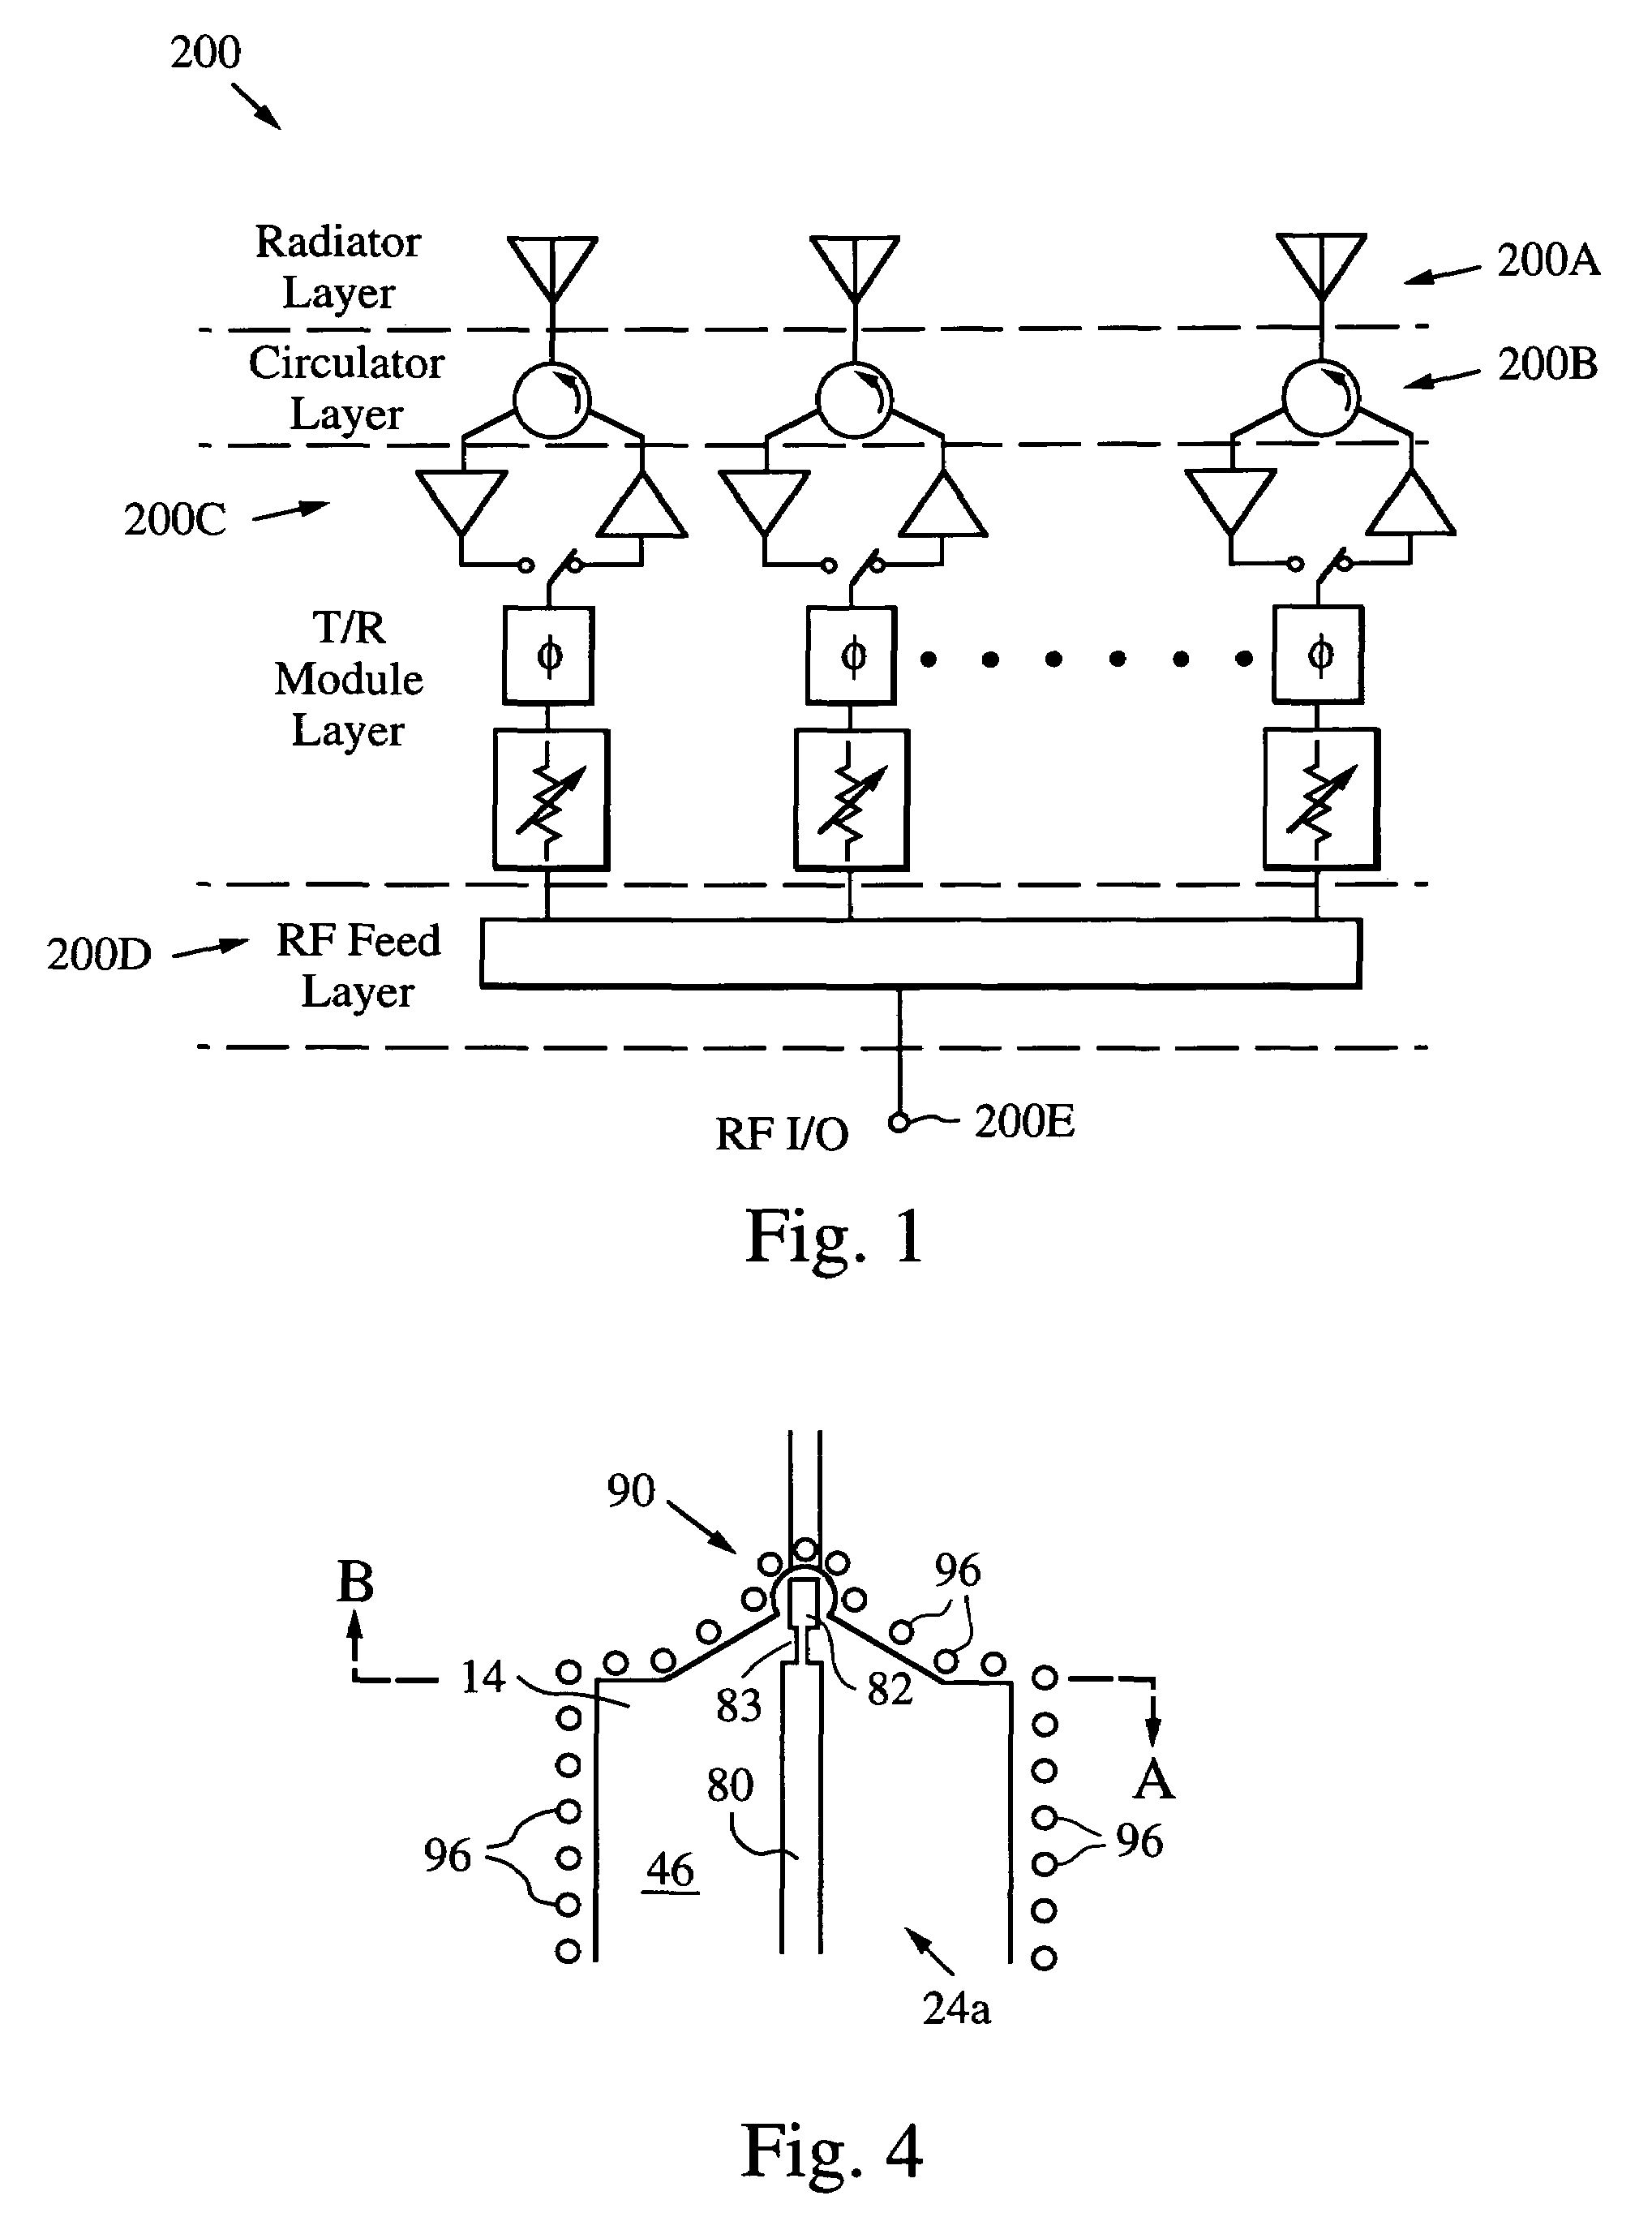 Embedded RF vertical interconnect for flexible conformal antenna